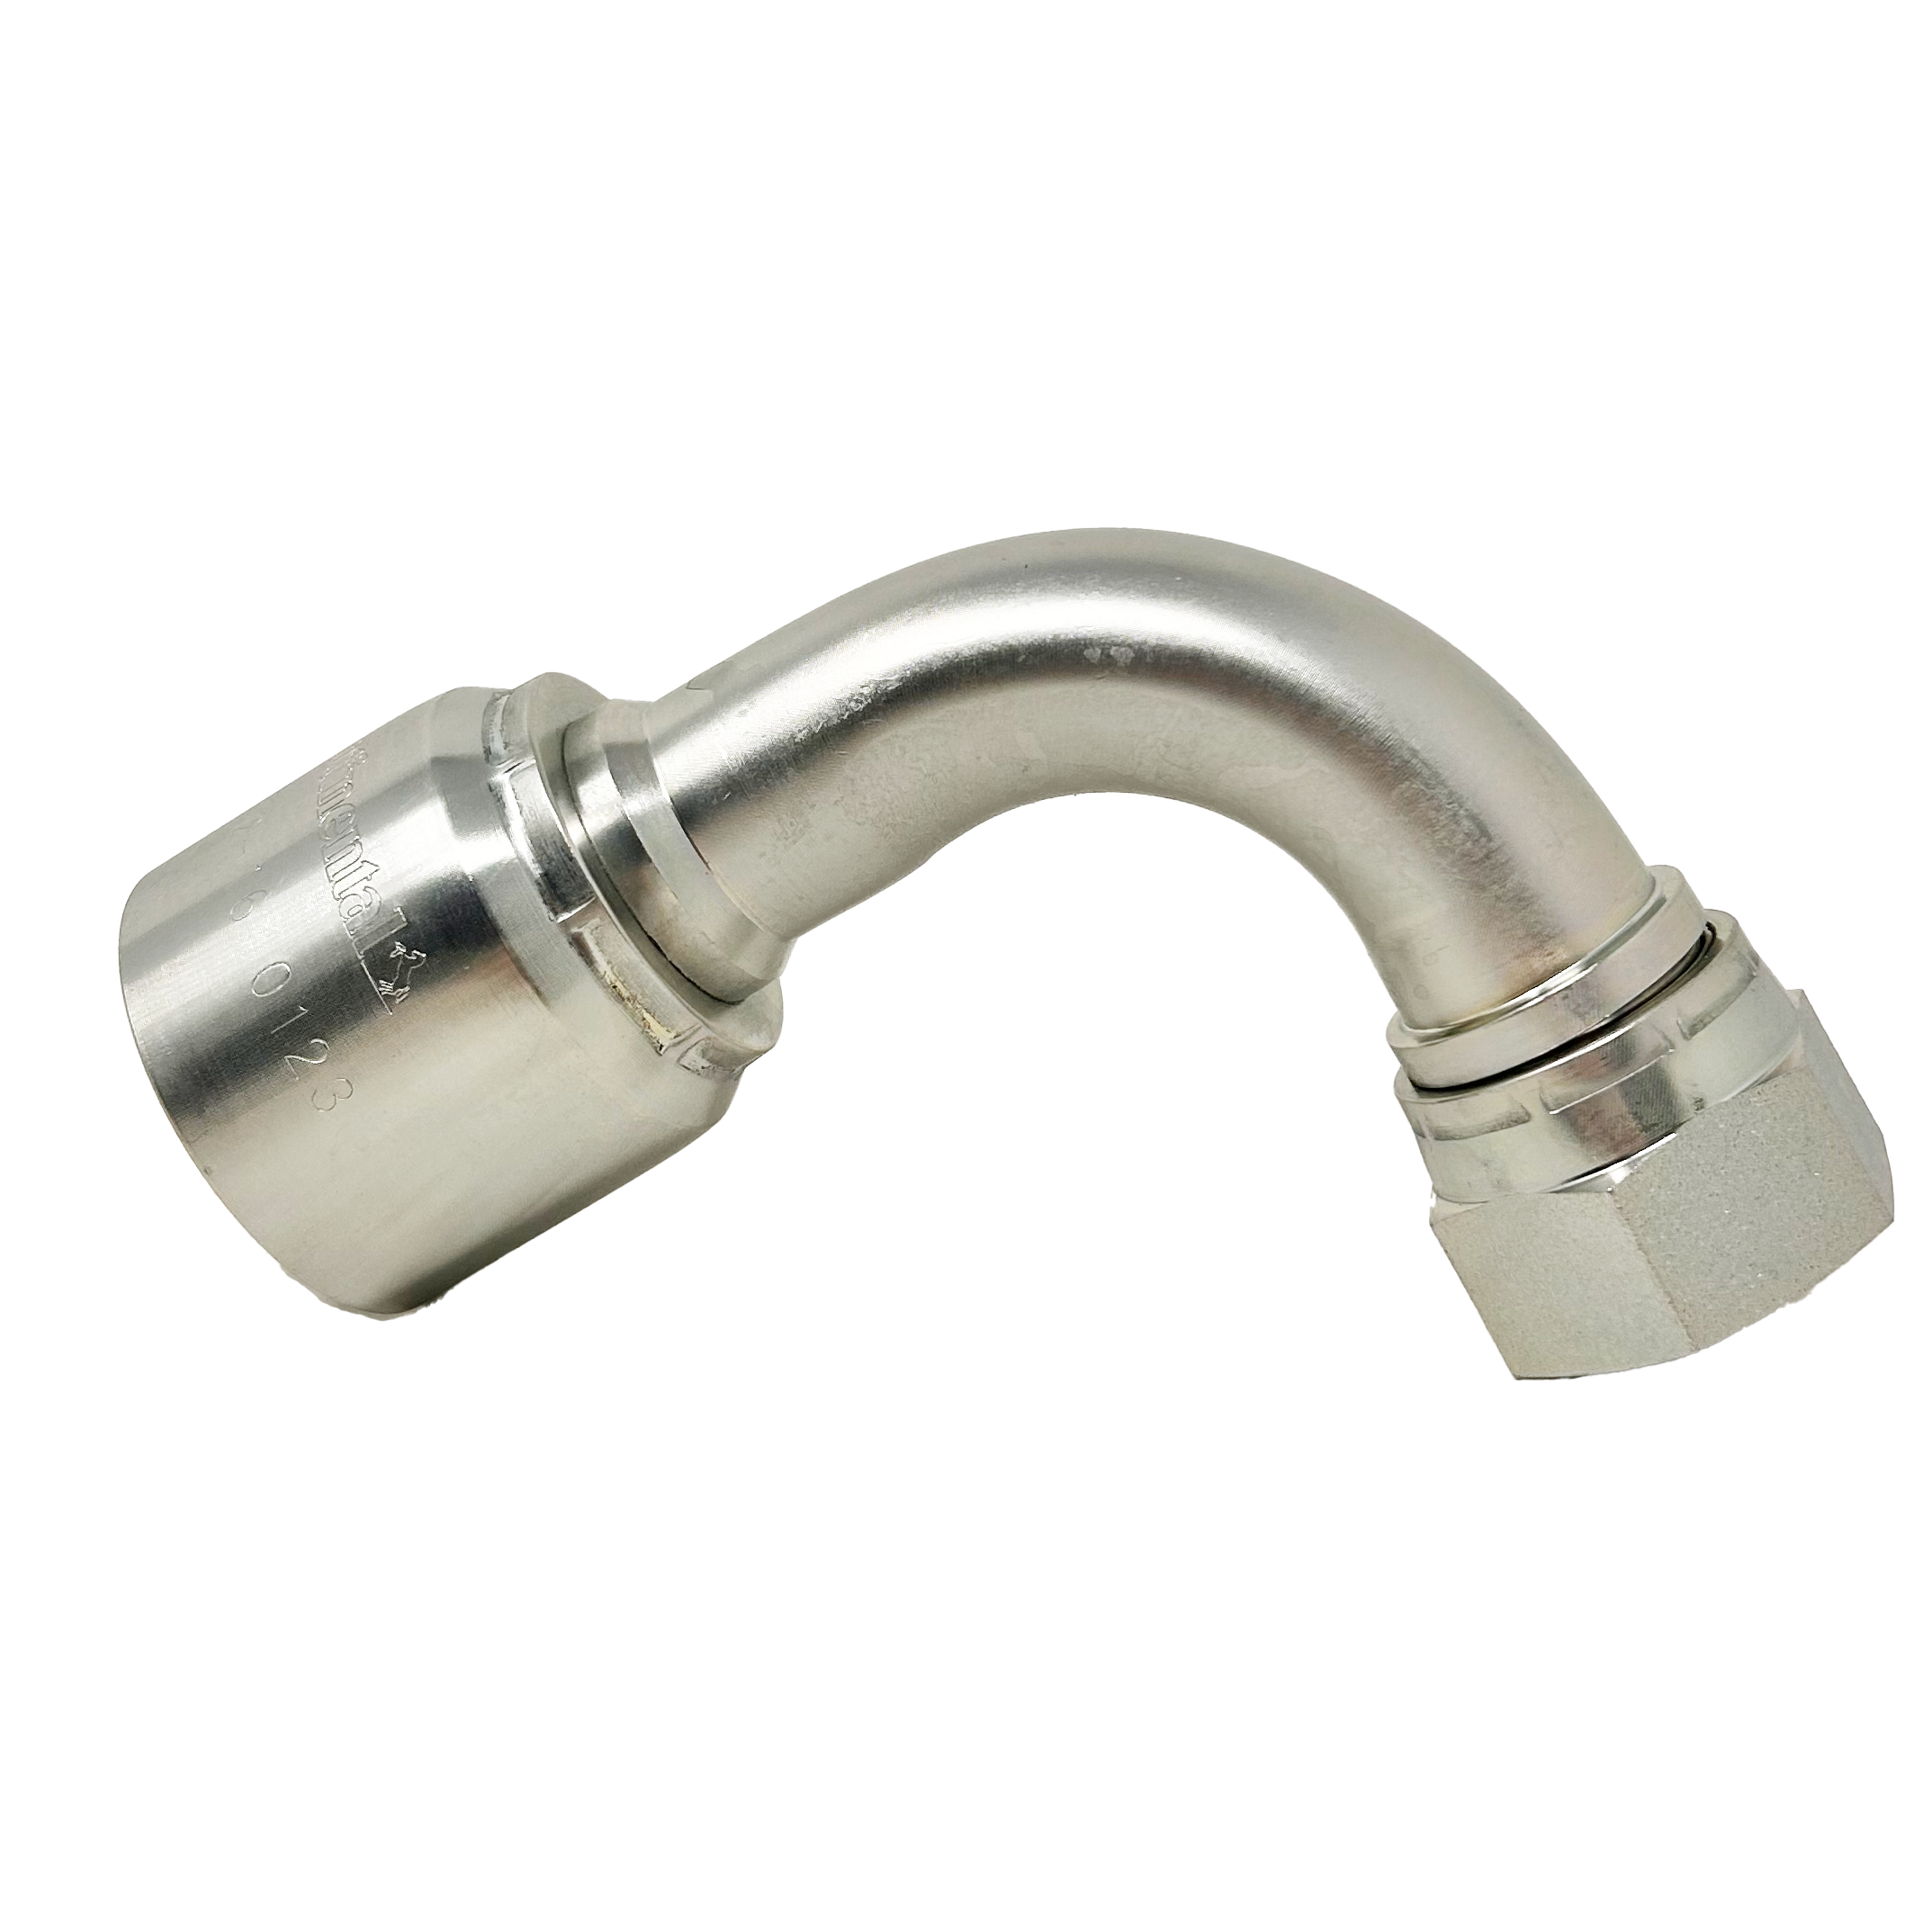 B2-JCFX90-0405: Continental Hose Fitting, 0.25 (1/4") Hose ID x 1/2-20 Female JIC, 90-Degree Swivel Connection